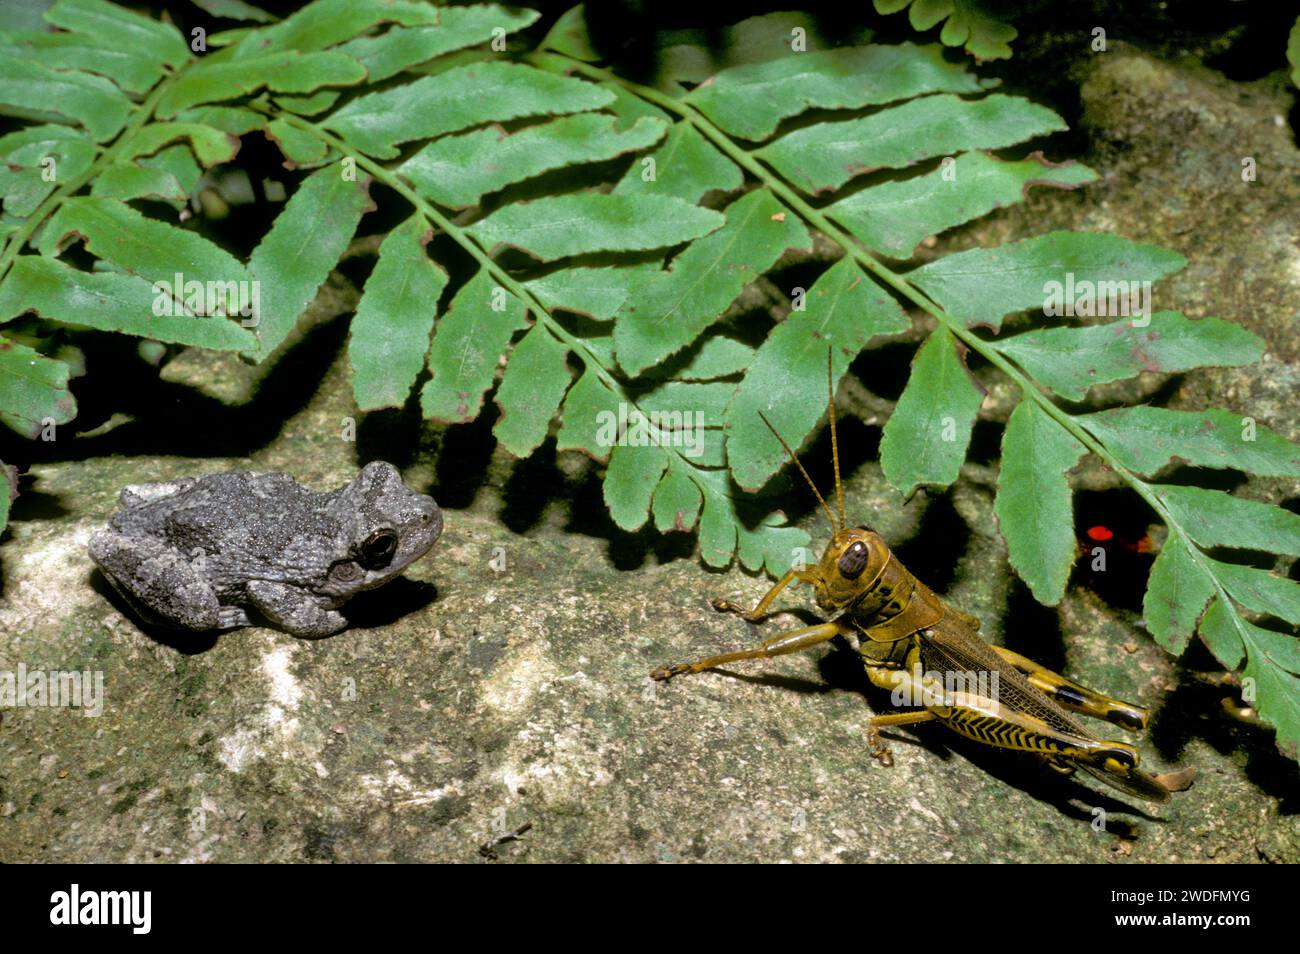 A grasshopper and a toad meet on a rock near a garden pool among ferns, midwest USA Stock Photo